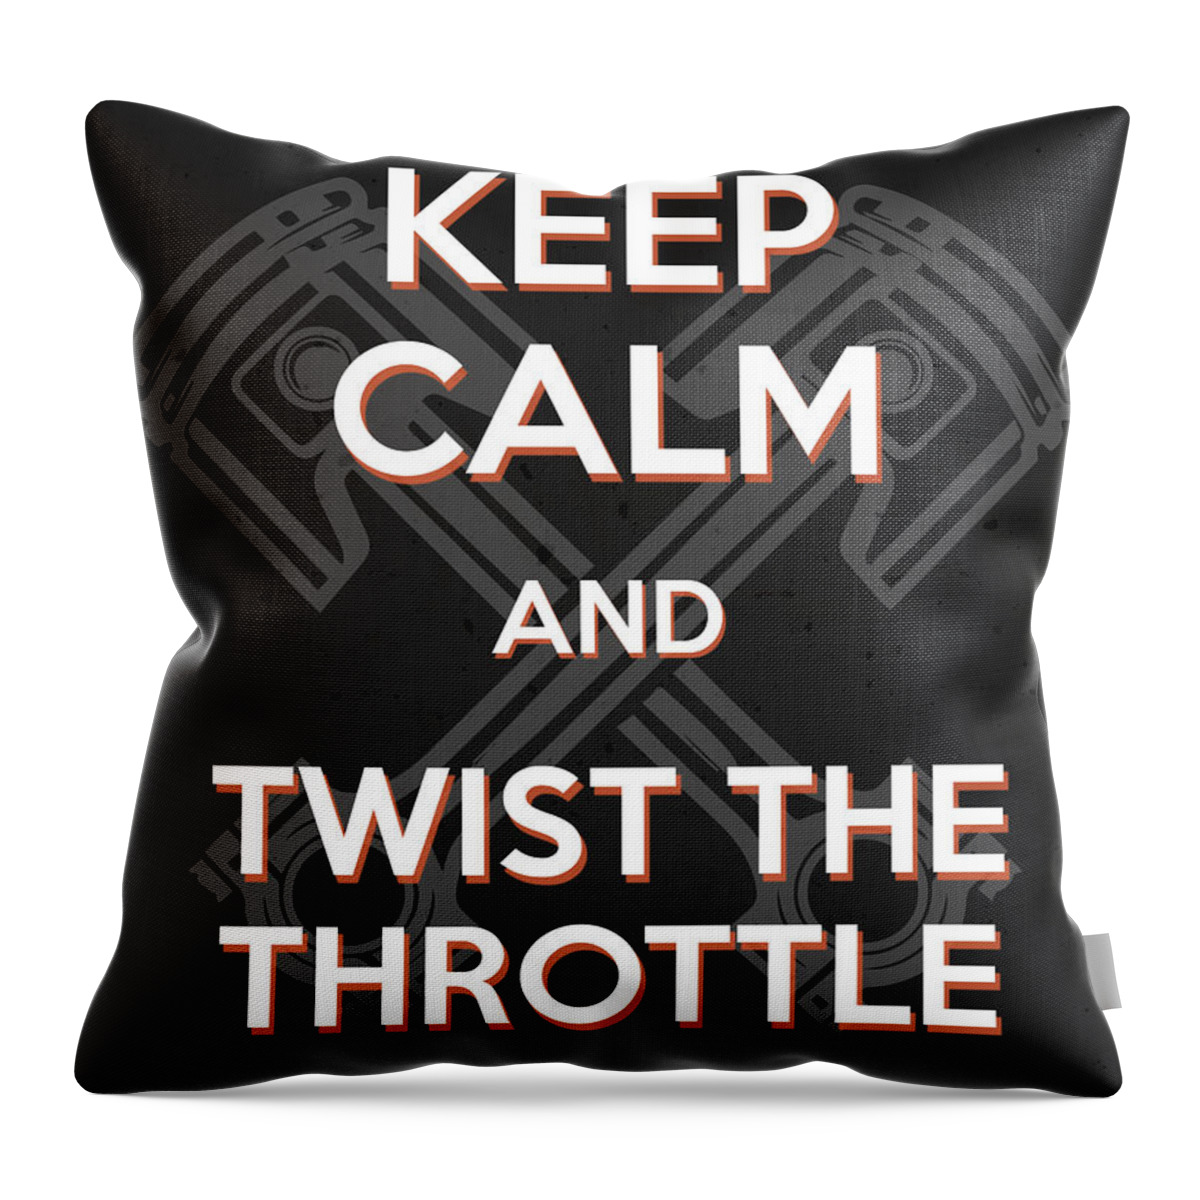 Keep Calm Throw Pillow featuring the mixed media Keep Calm and twist the throttle - Motorcycle Riding Quote by Studio Grafiikka